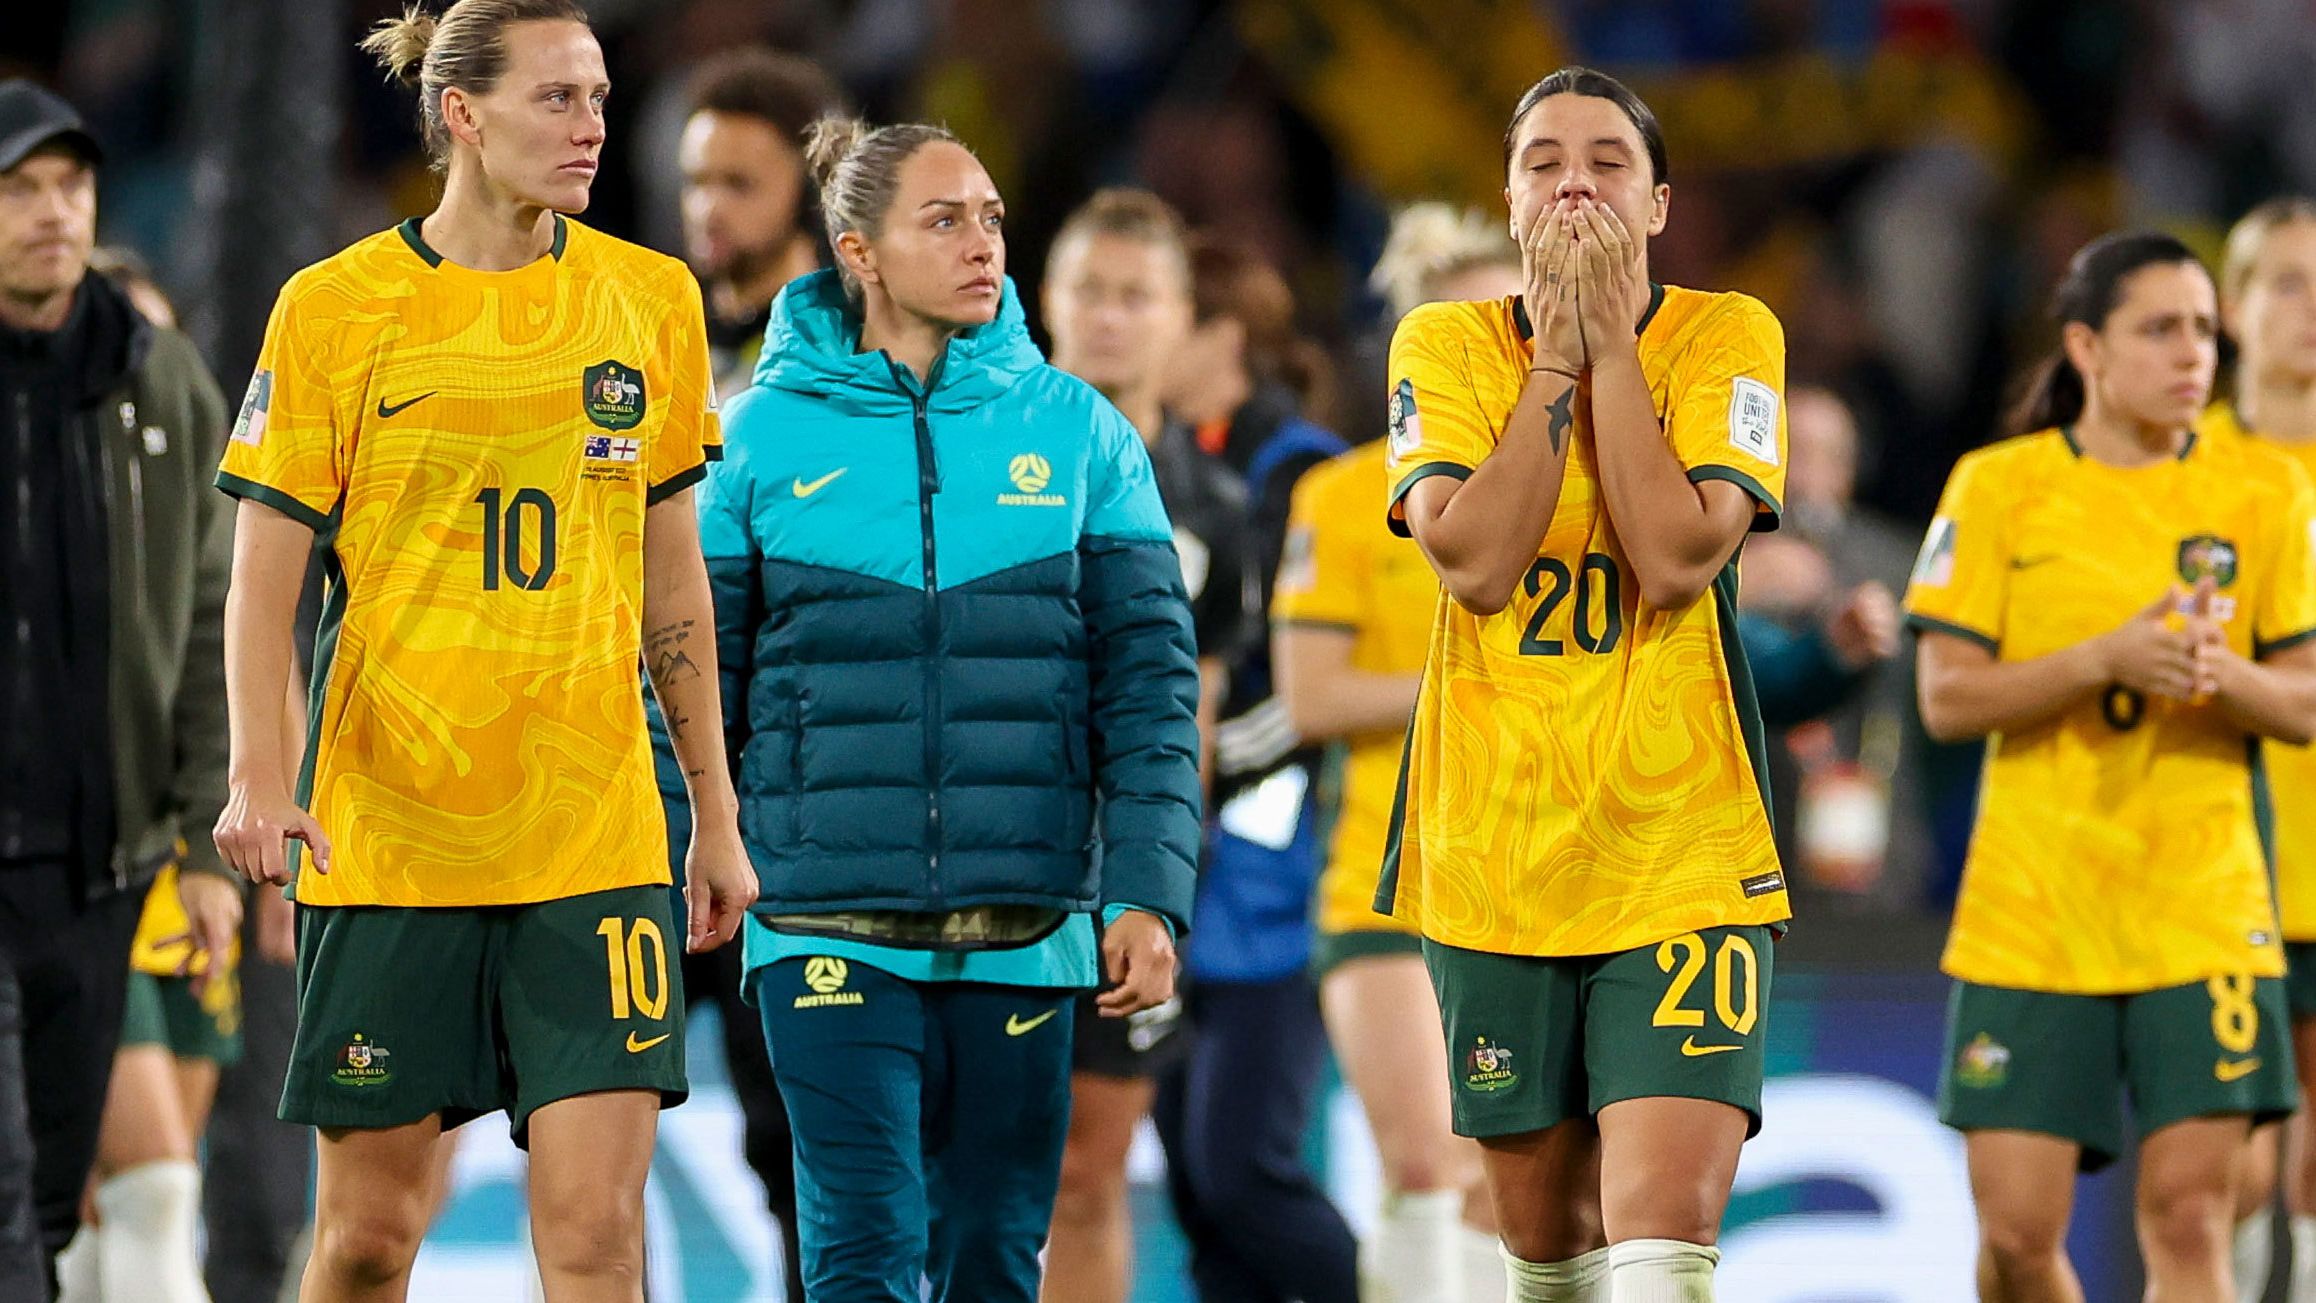 Matildas forwards Emily van Egmond and Sam Kerr are devastated after their fate is sealed in a heartbreaking loss to England.